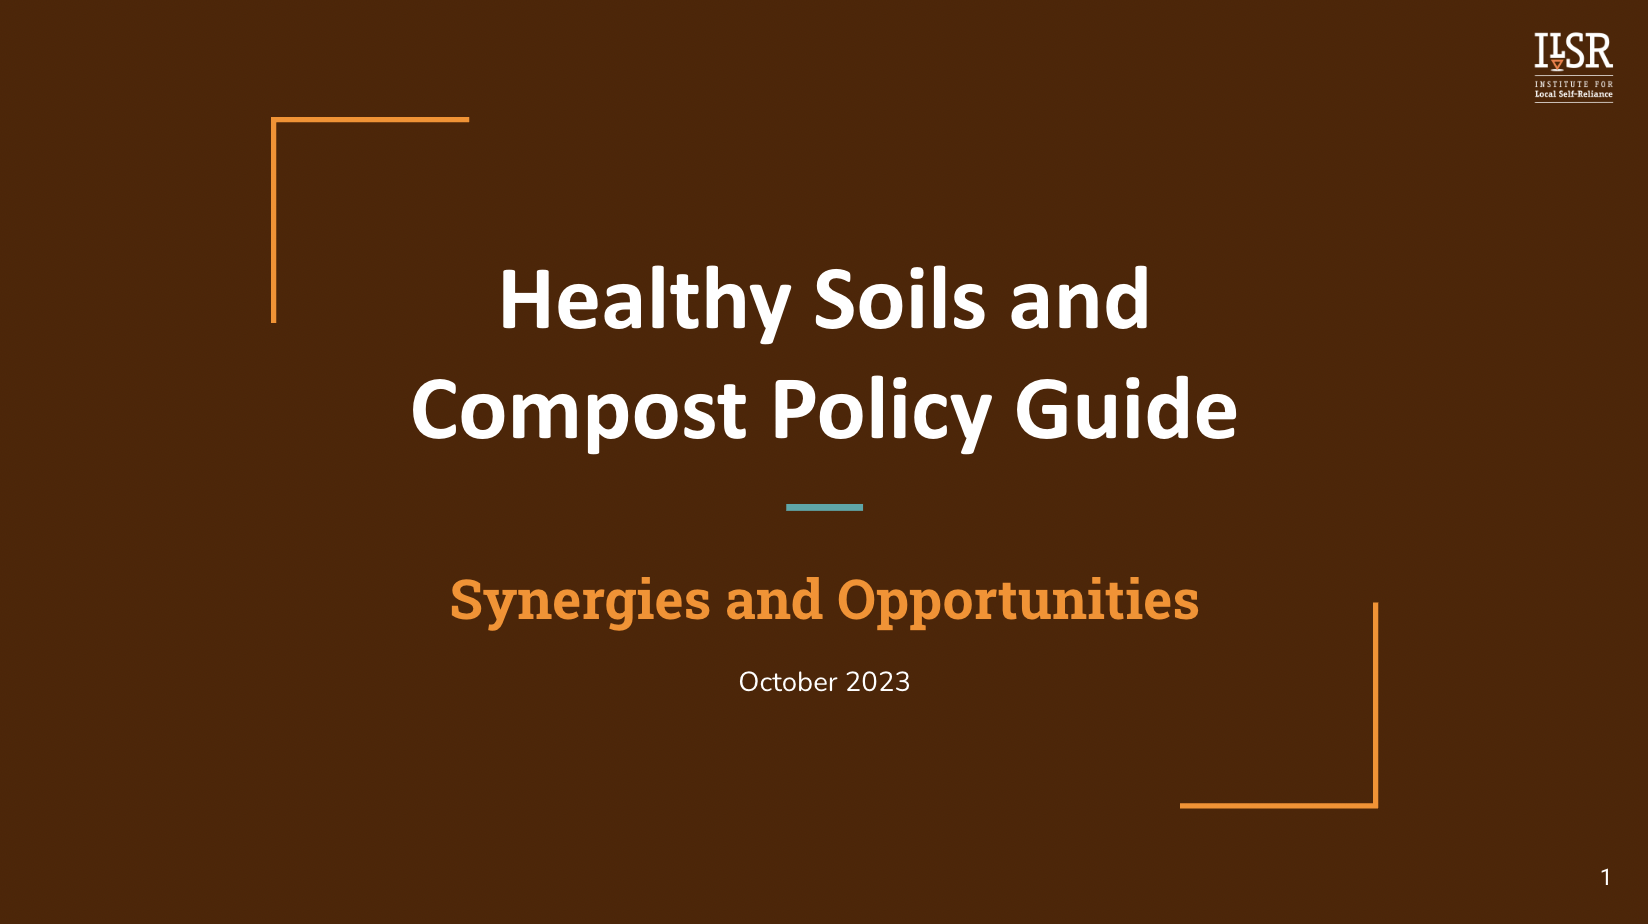 Healthy Soils and Compost Policy guide title page